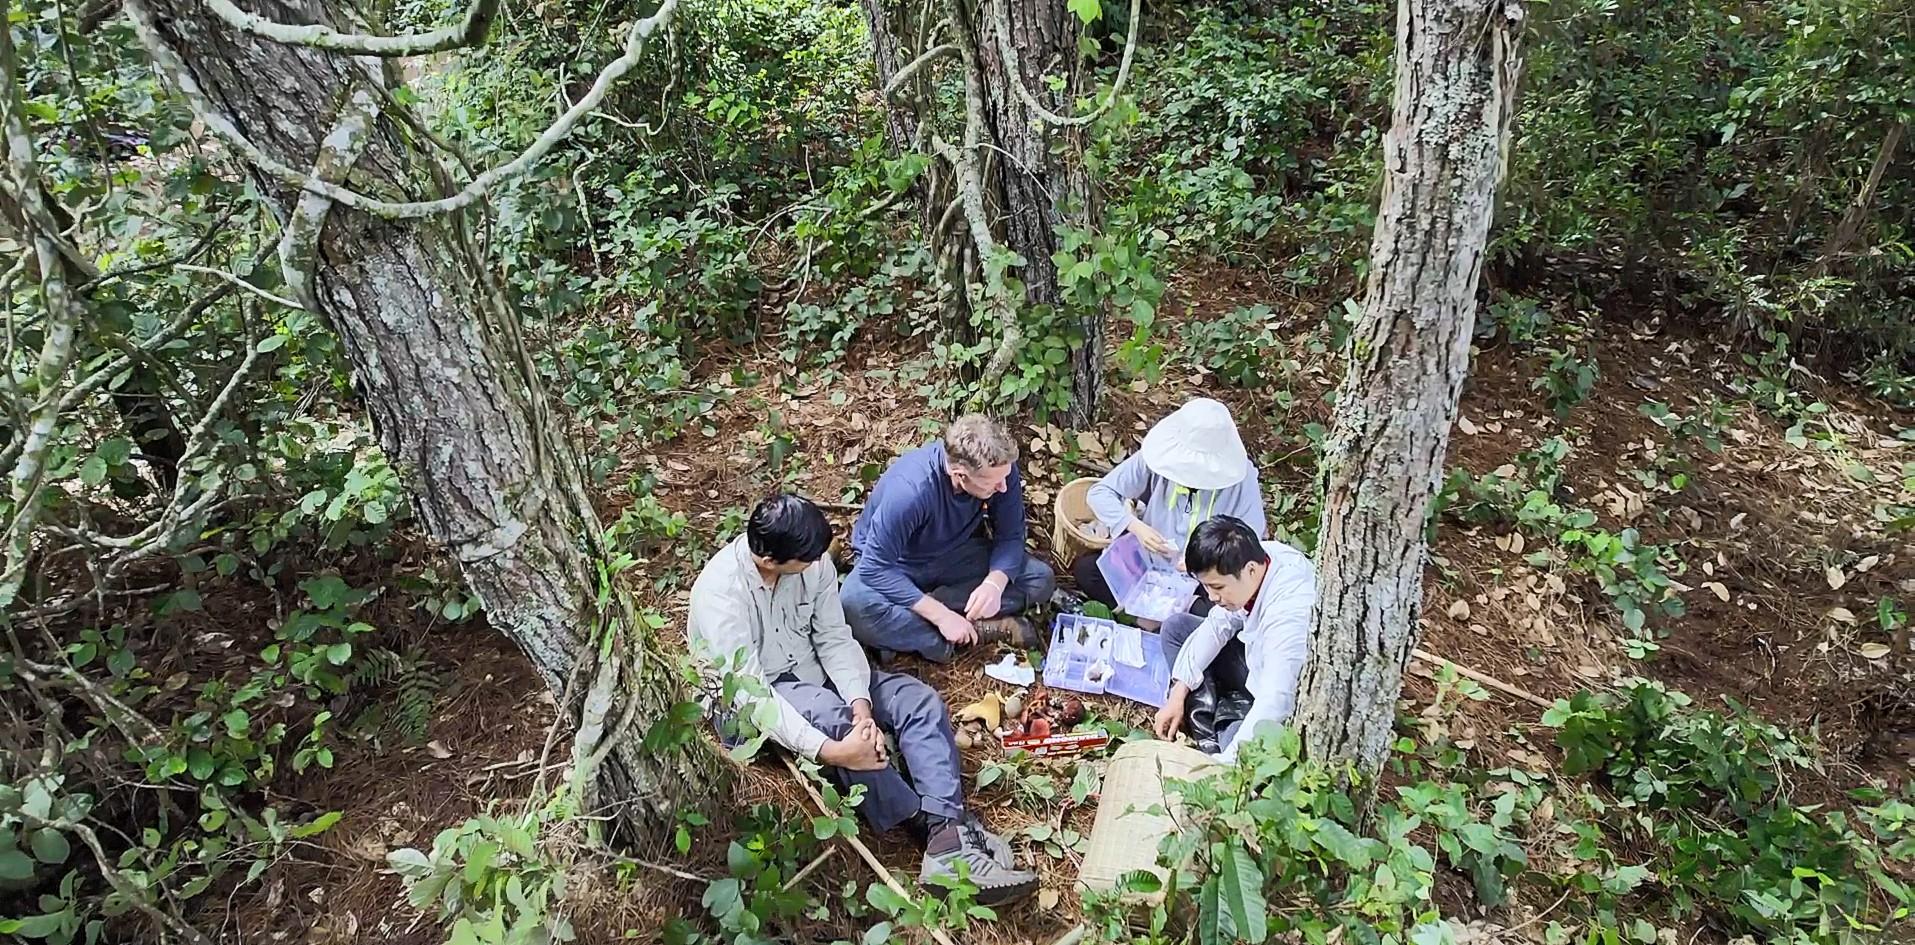 The Hong Kong Space Museum will launch a new dome show, "Nature's Hidden Kingdom", at its Space Theatre tomorrow (January 13). Picture shows scientists studying how to use fungi to break down plastic.